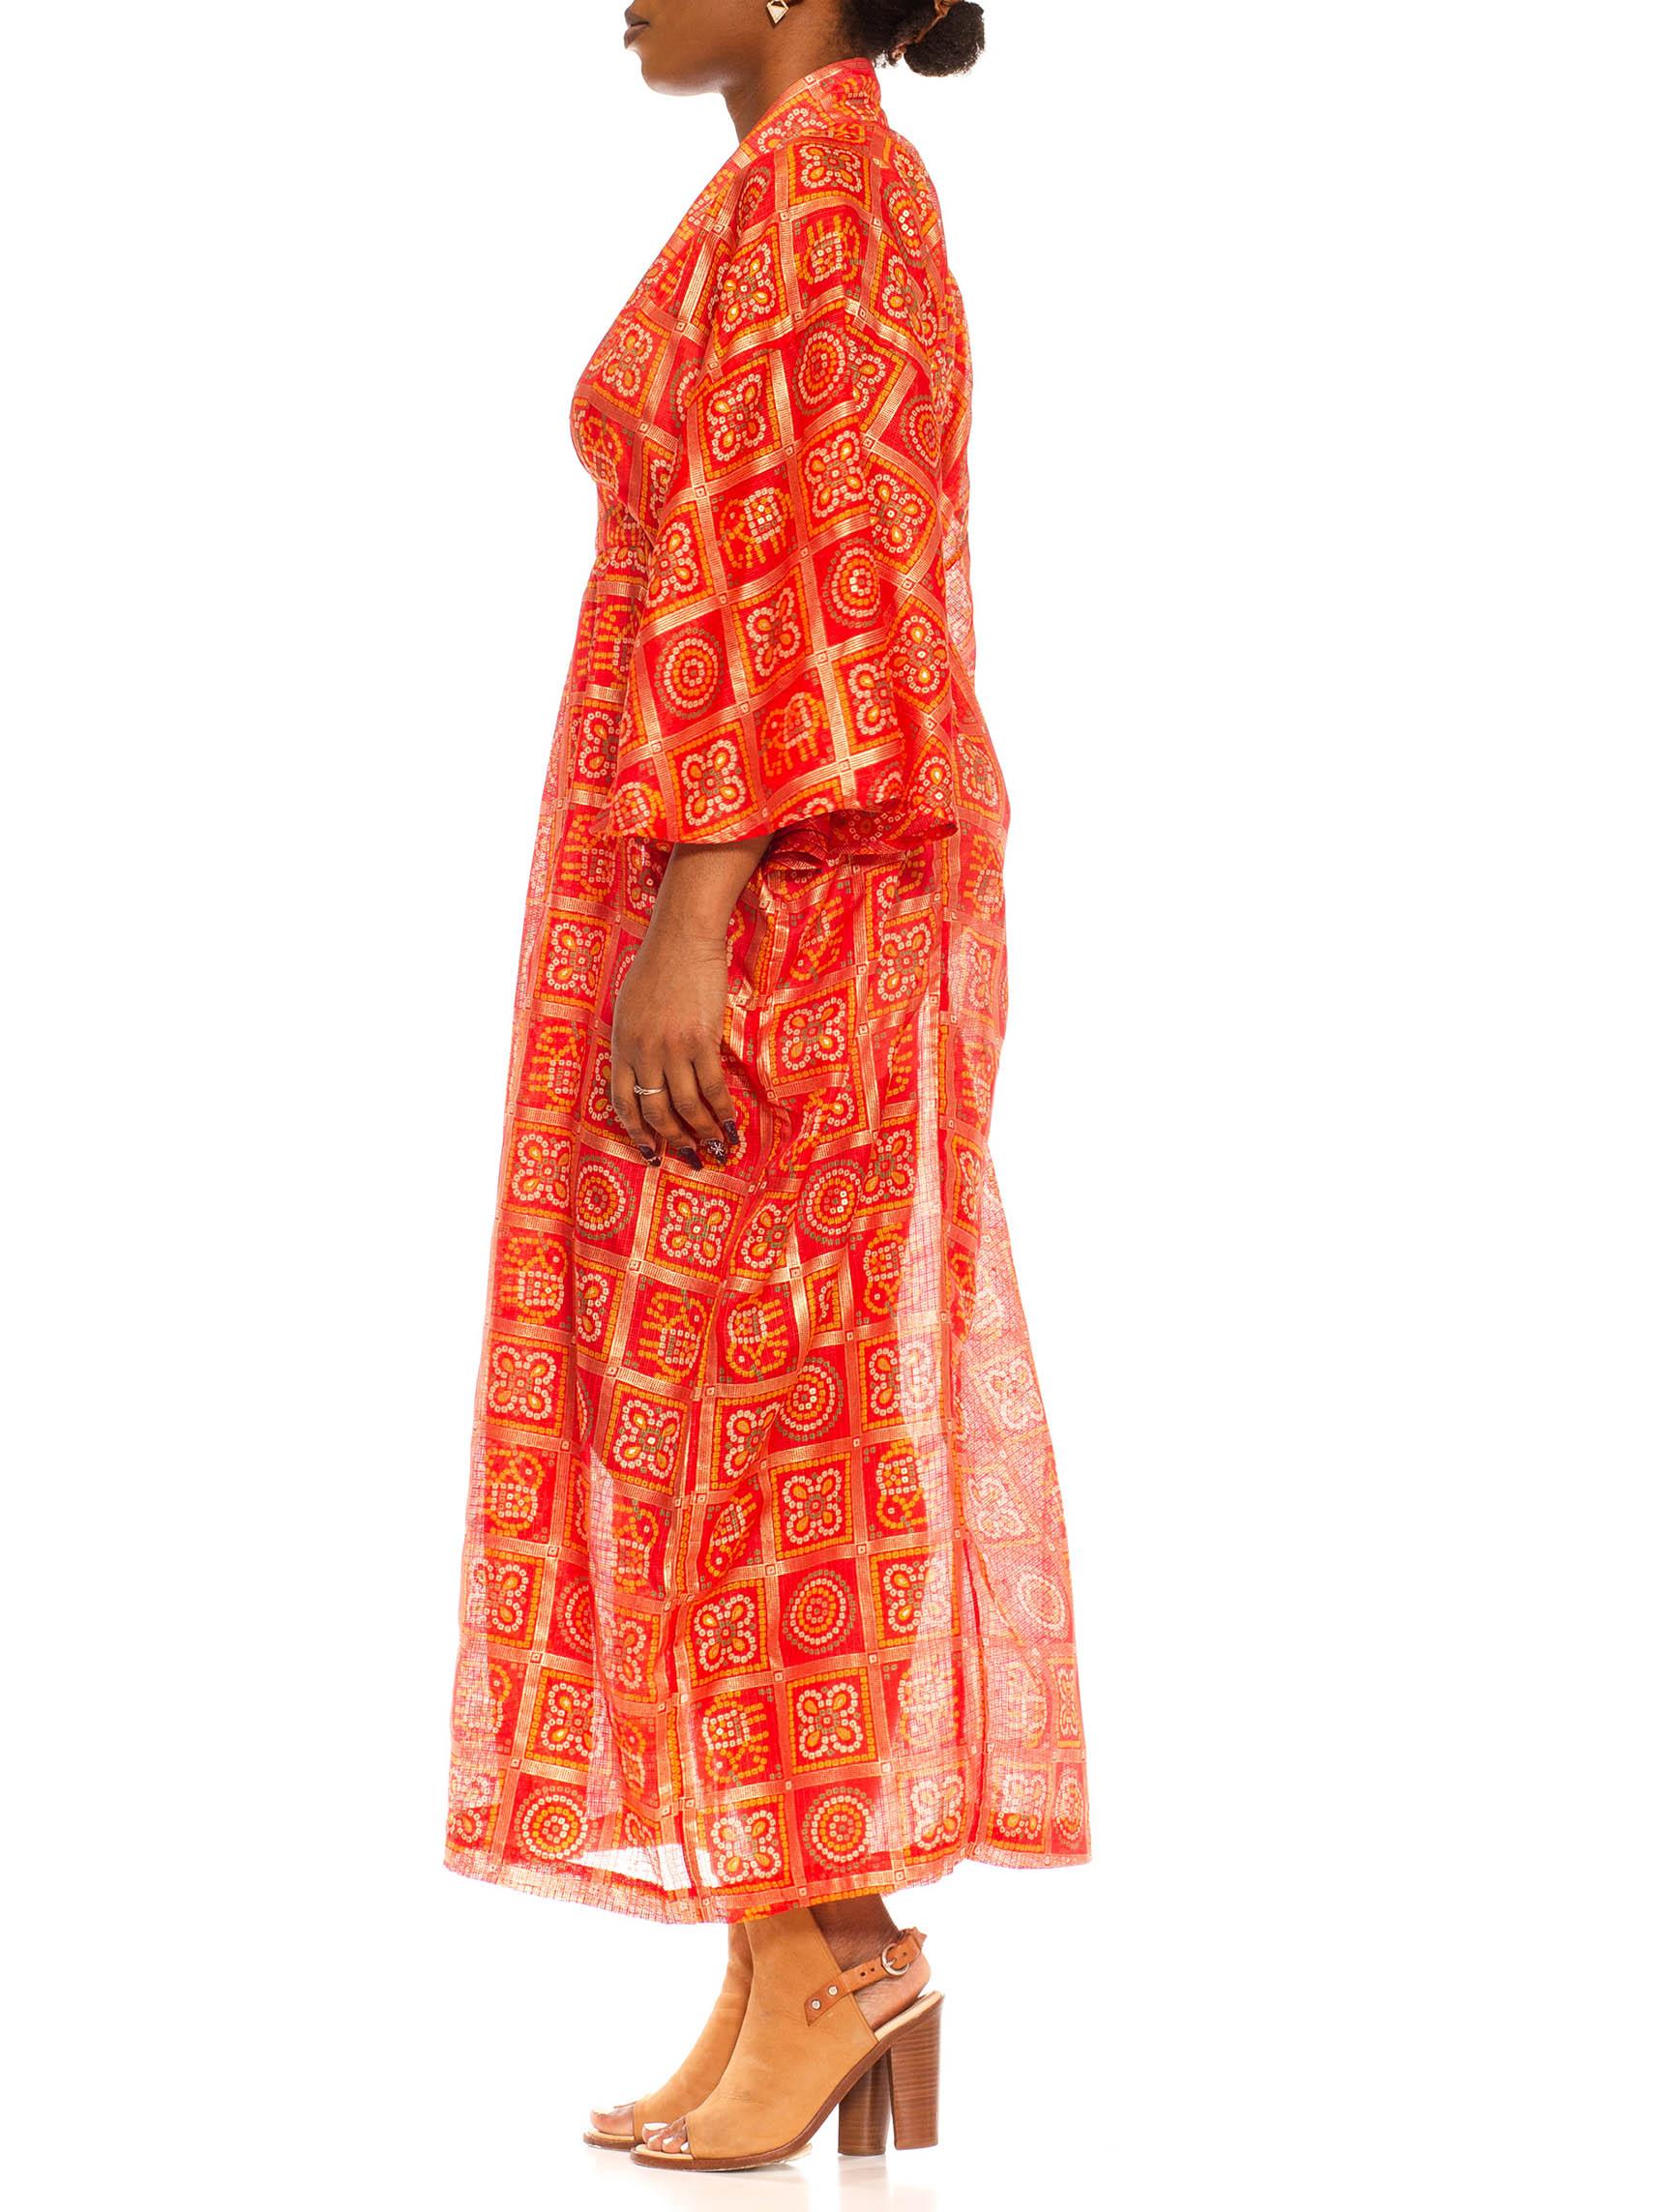 Morphew Collection Red & Gold Polyester Geometric Kaftan Made From Vintage Saris
MORPHEW COLLECTION is made entirely by hand in our NYC Ateliér of rare antique materials sourced from around the globe. Our sustainable vintage materials represent over